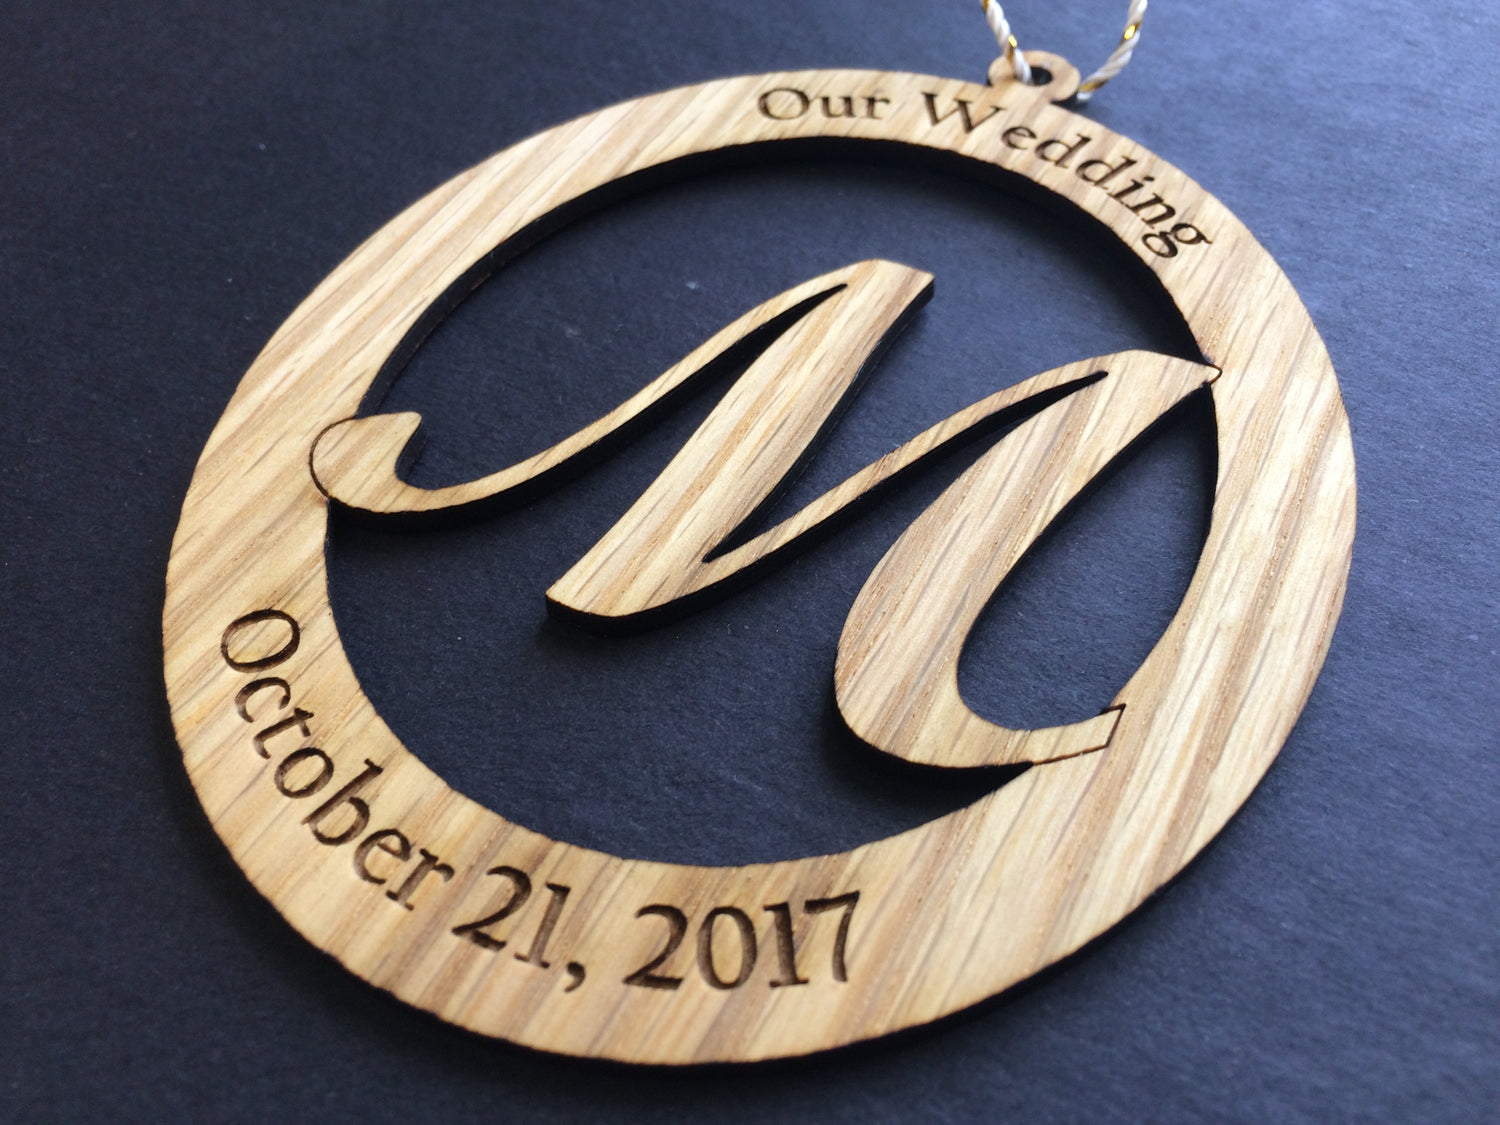 Our Wedding Ornament, Ornament, home decor, laser engraved - Legacy Images